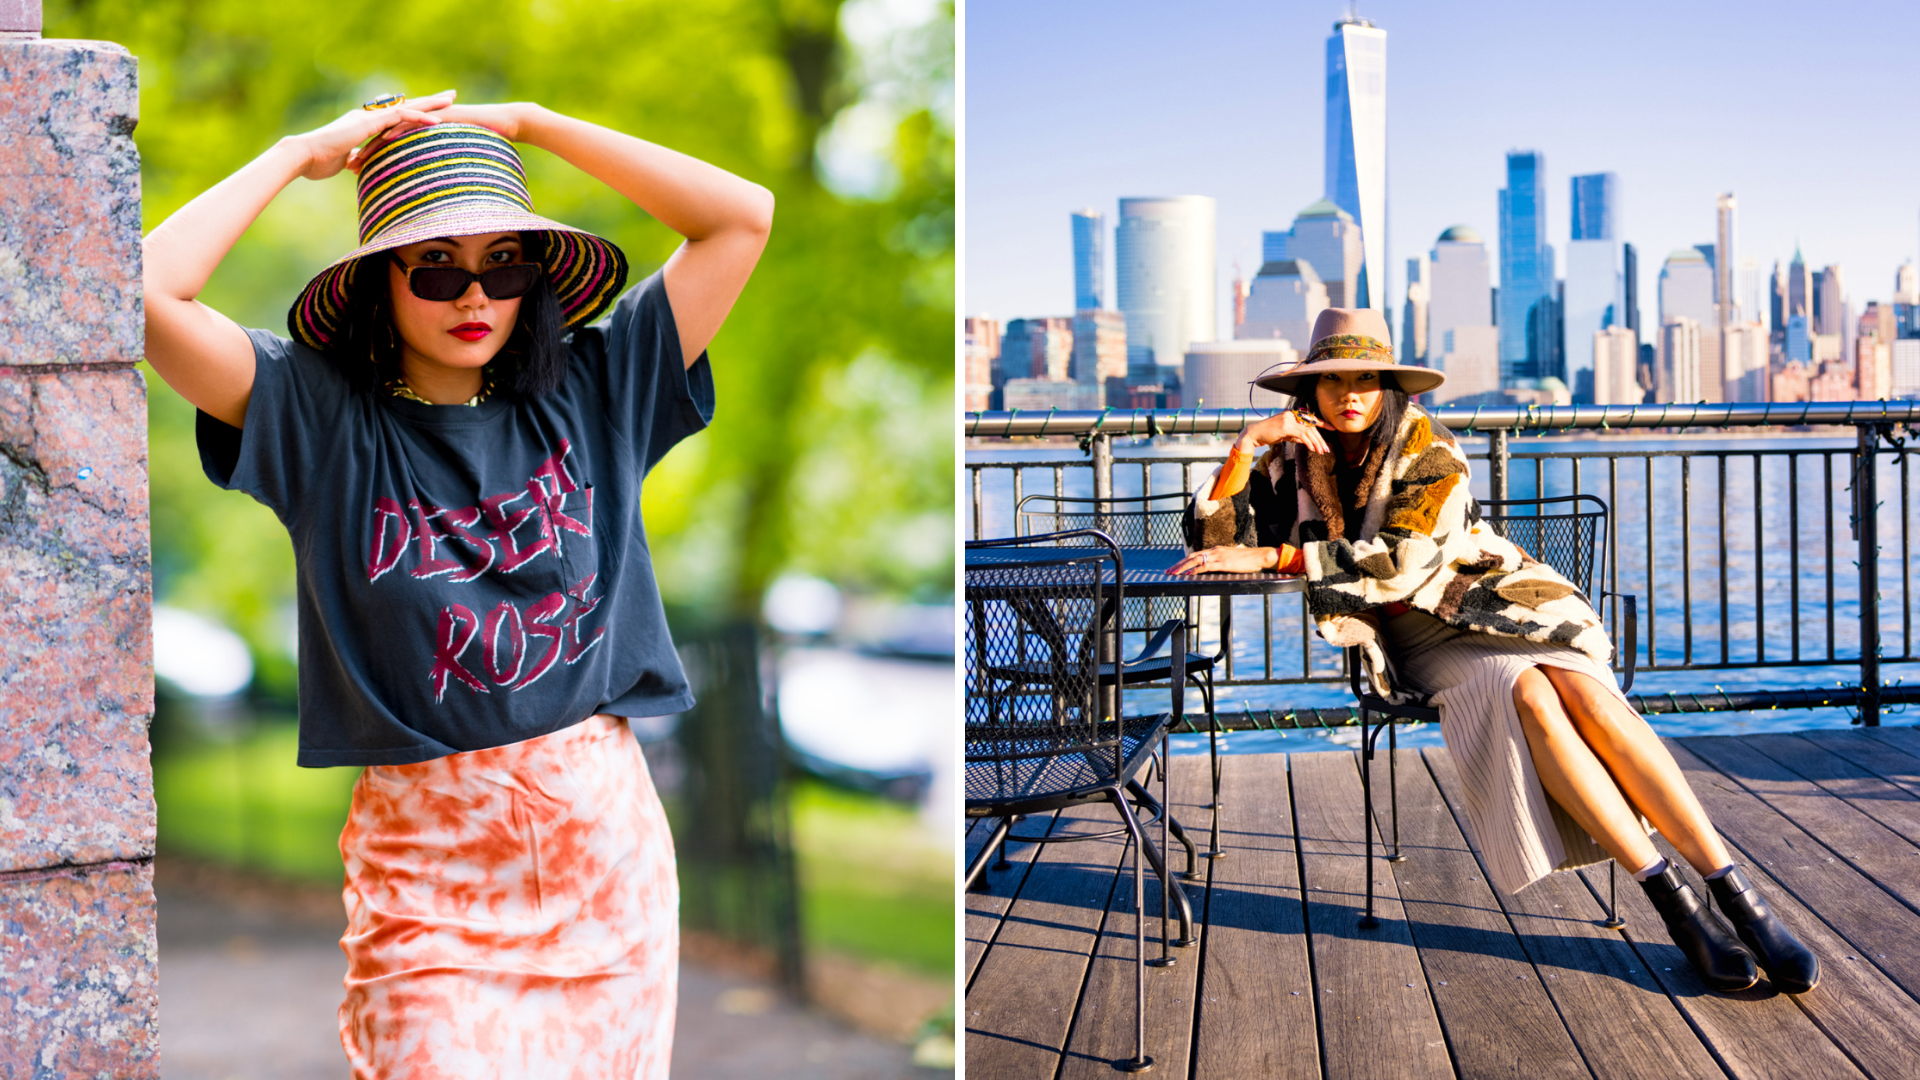 nanphanita jacob is wearing san diego hat company bucket hat on the left and wearing kathy jeanne millinery hat on the right